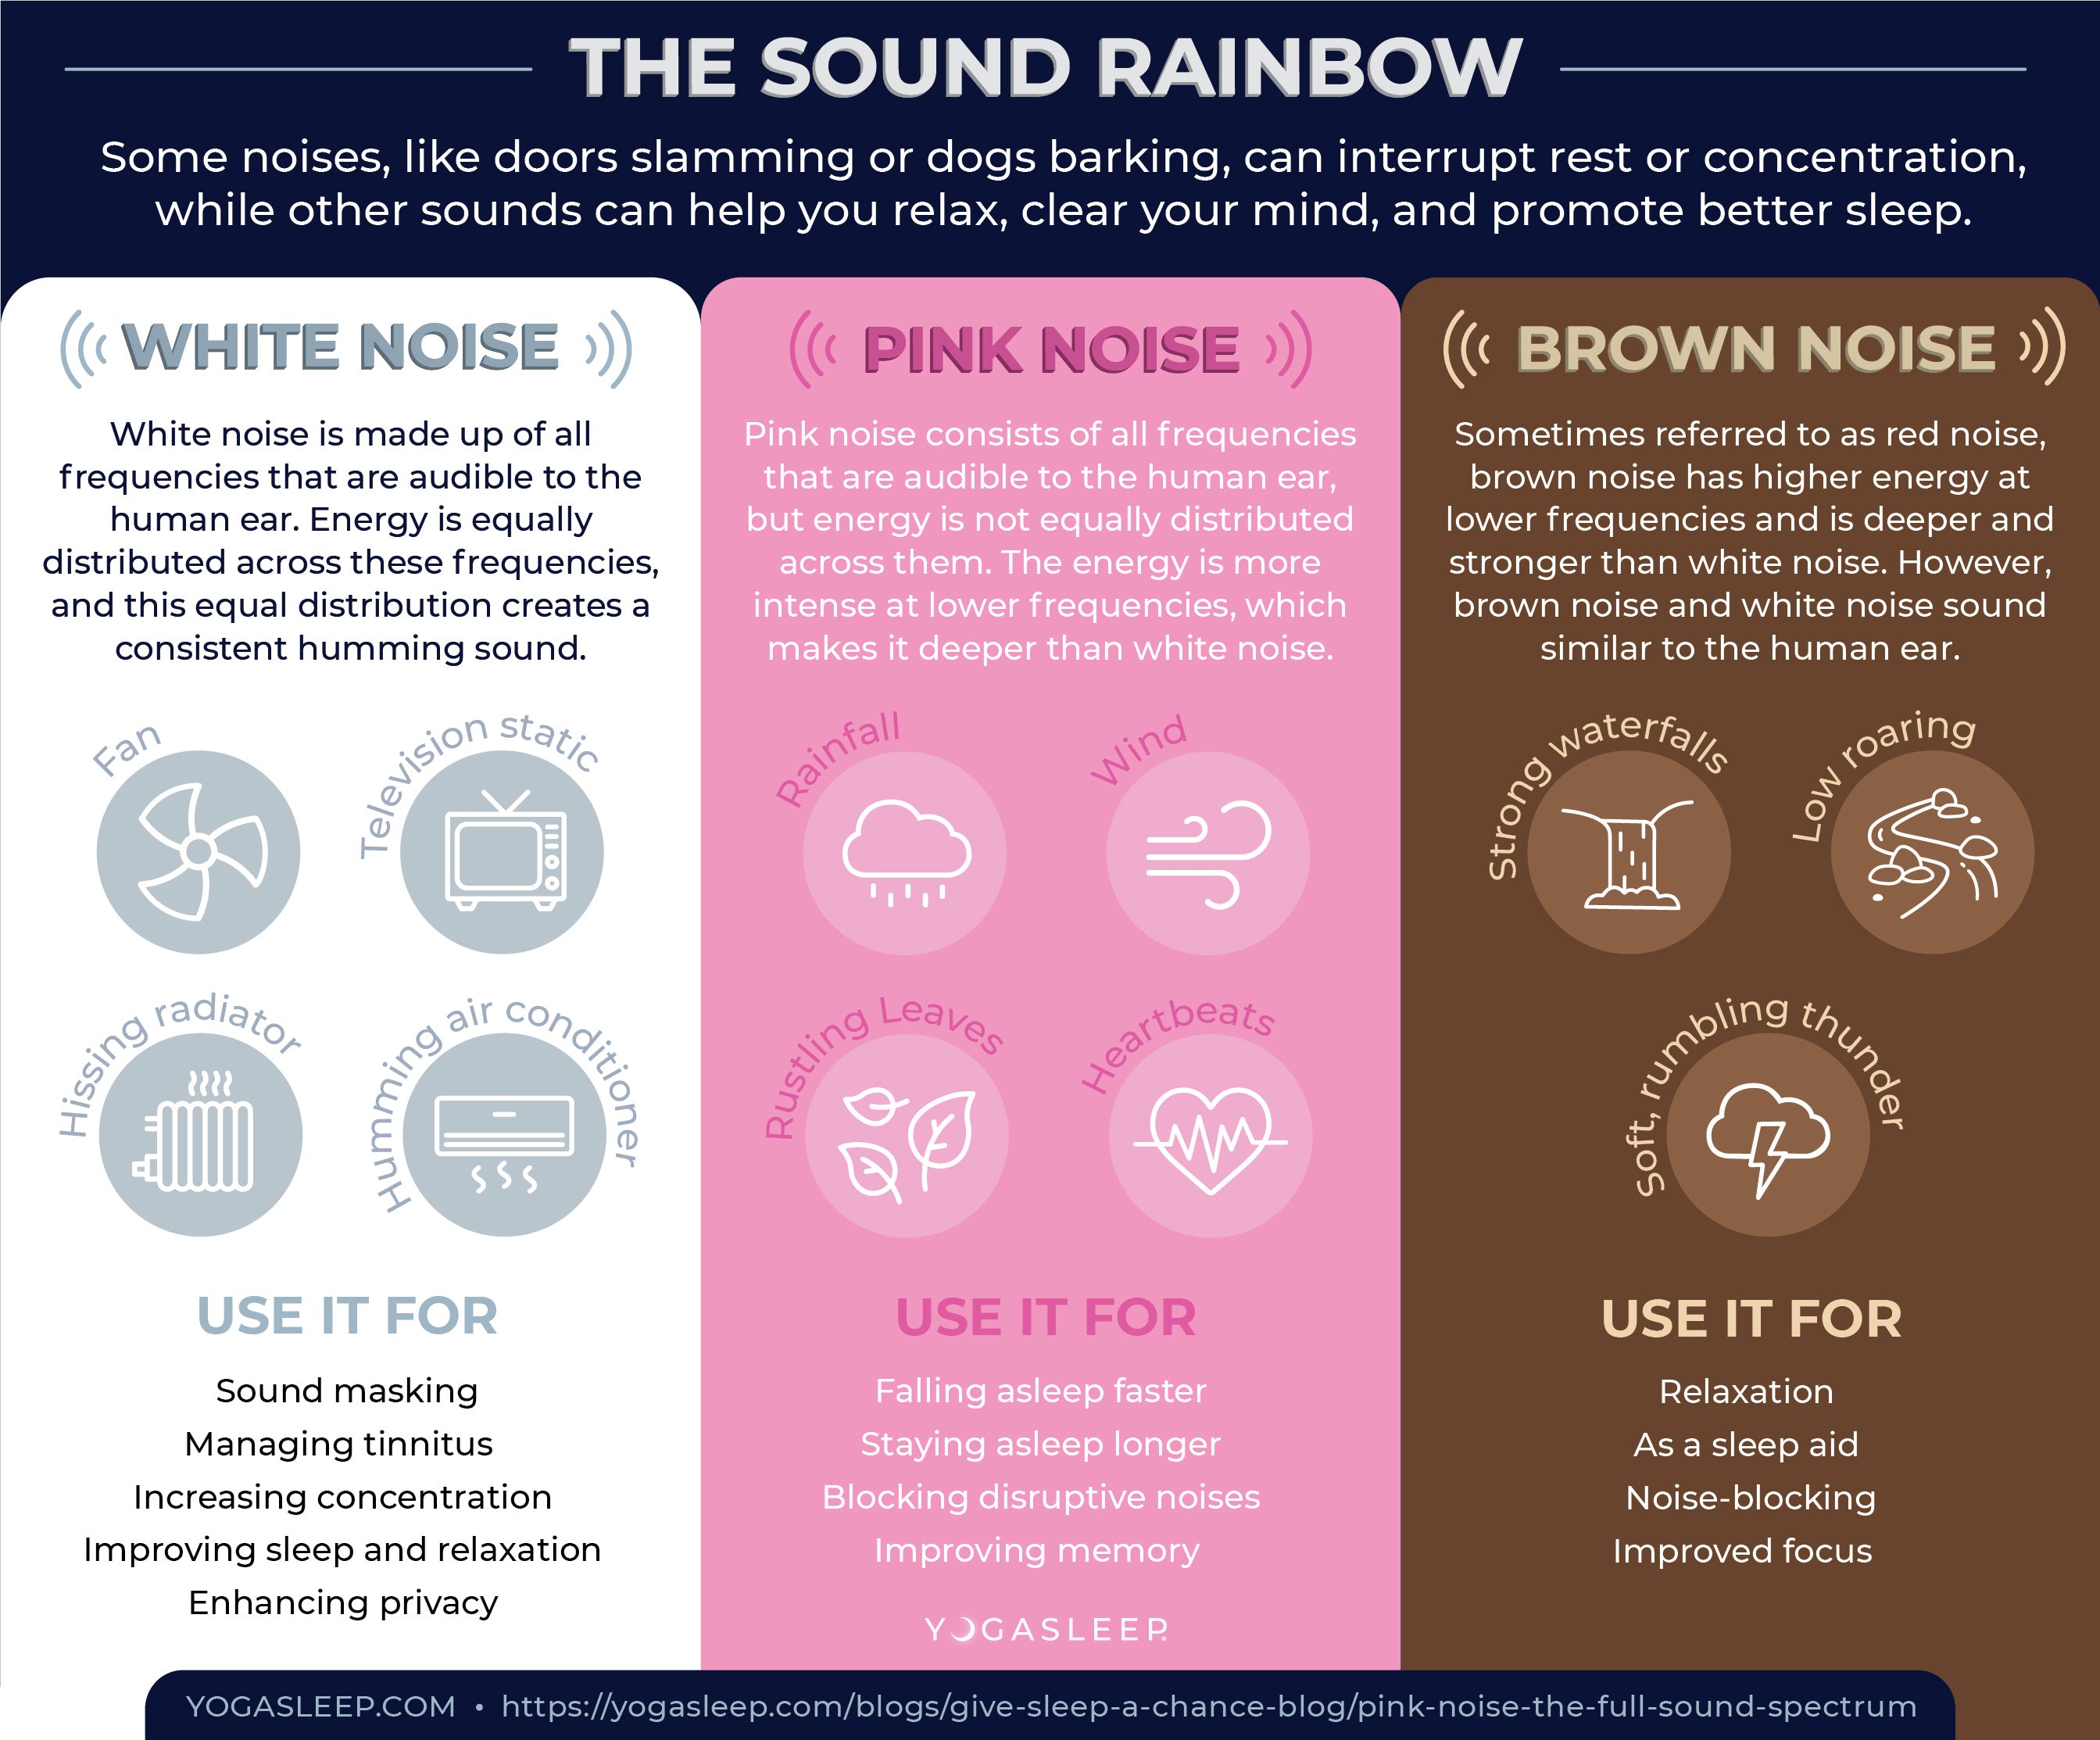 White, Pink, and Brown Noise: What's the difference? – Sound of Sleep